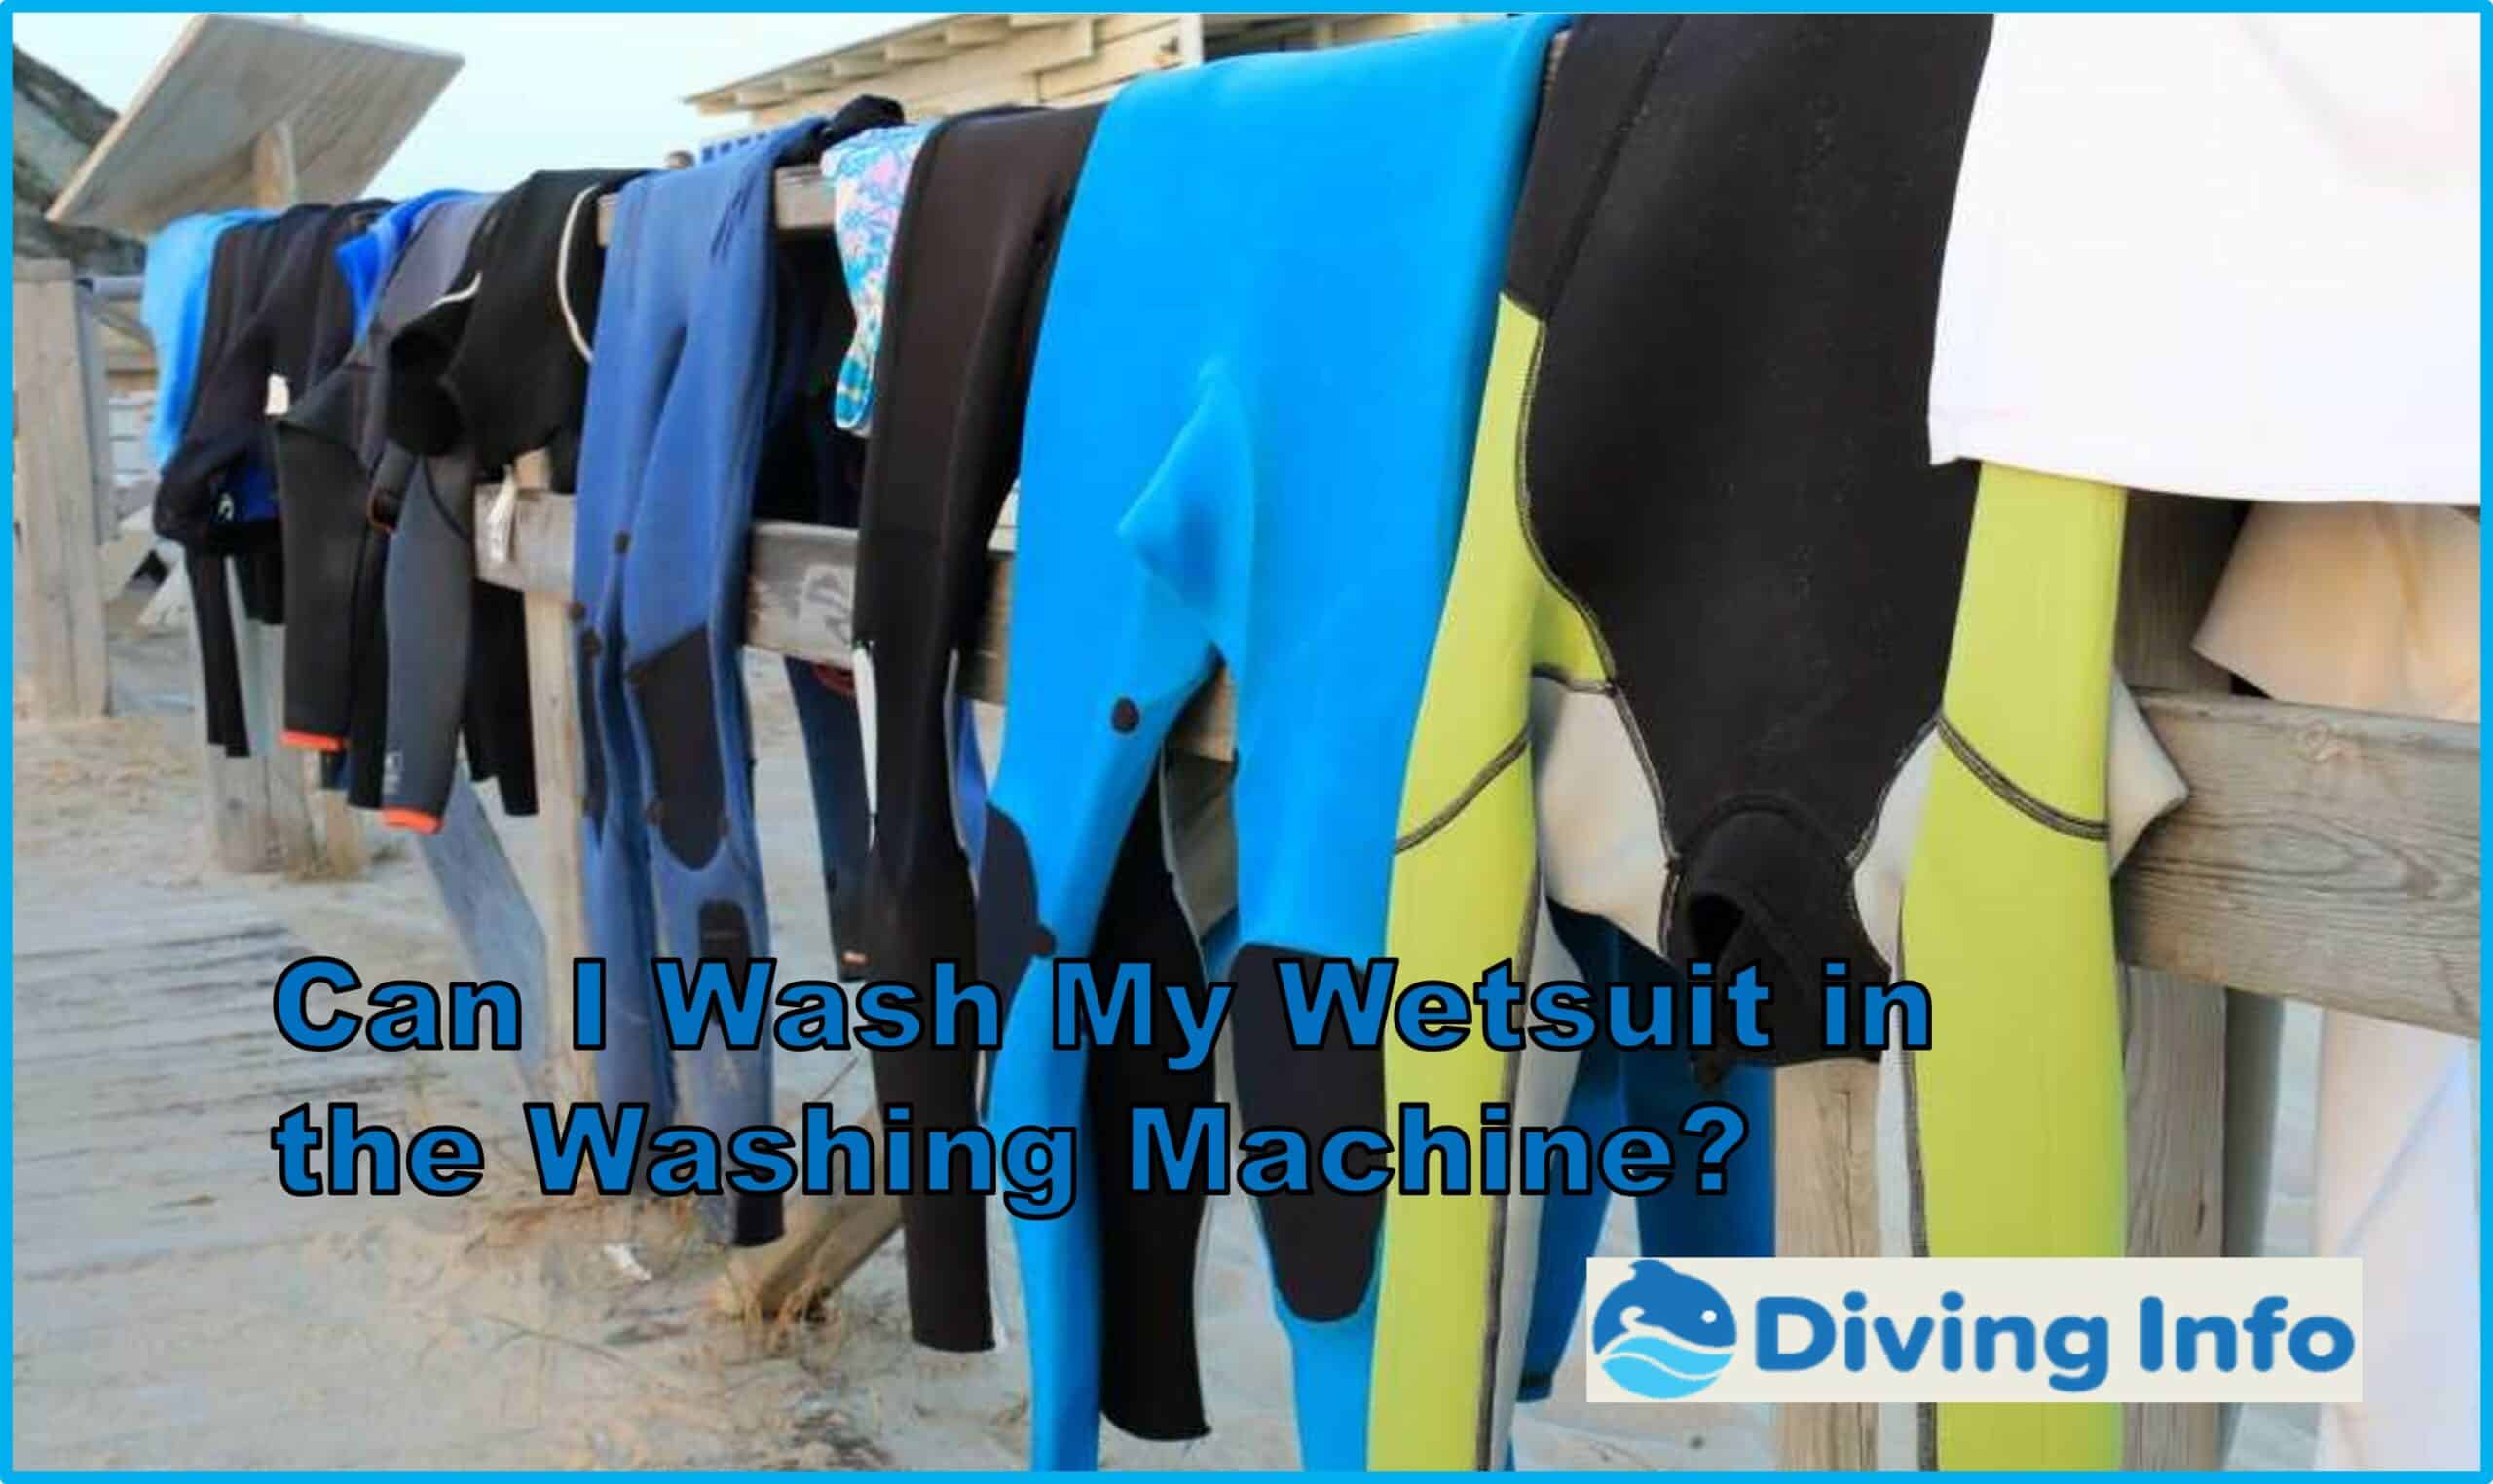 Can I Wash My Wetsuit in the Washing Machine?